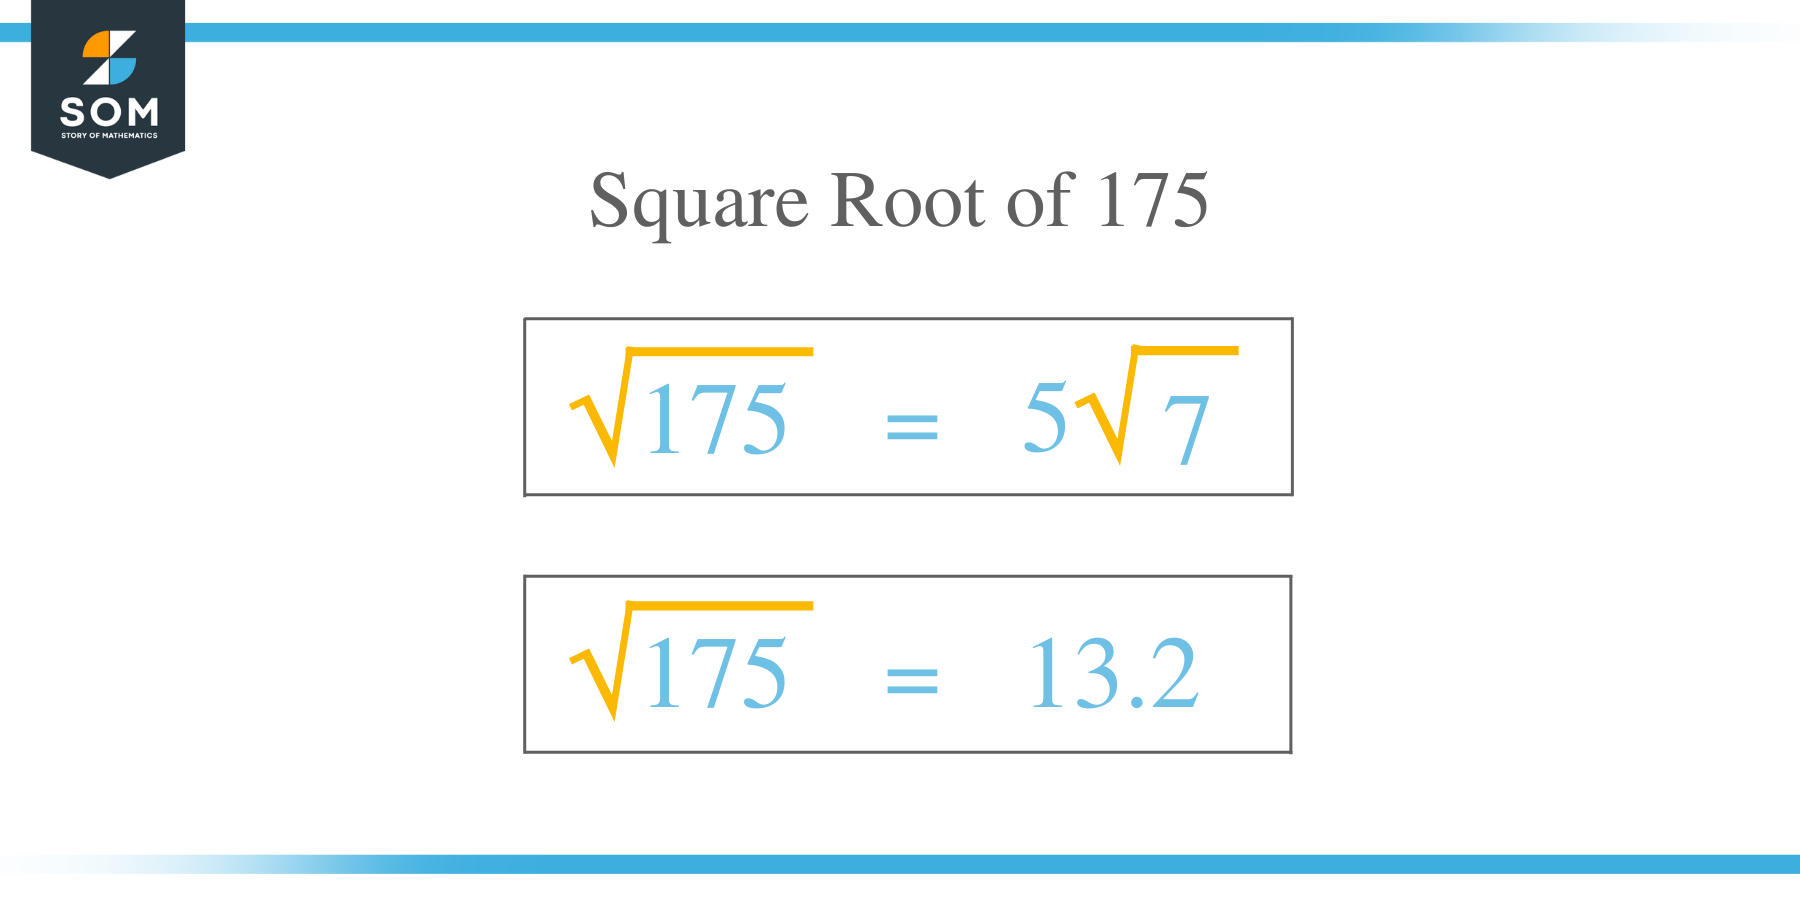 Square Root of 175